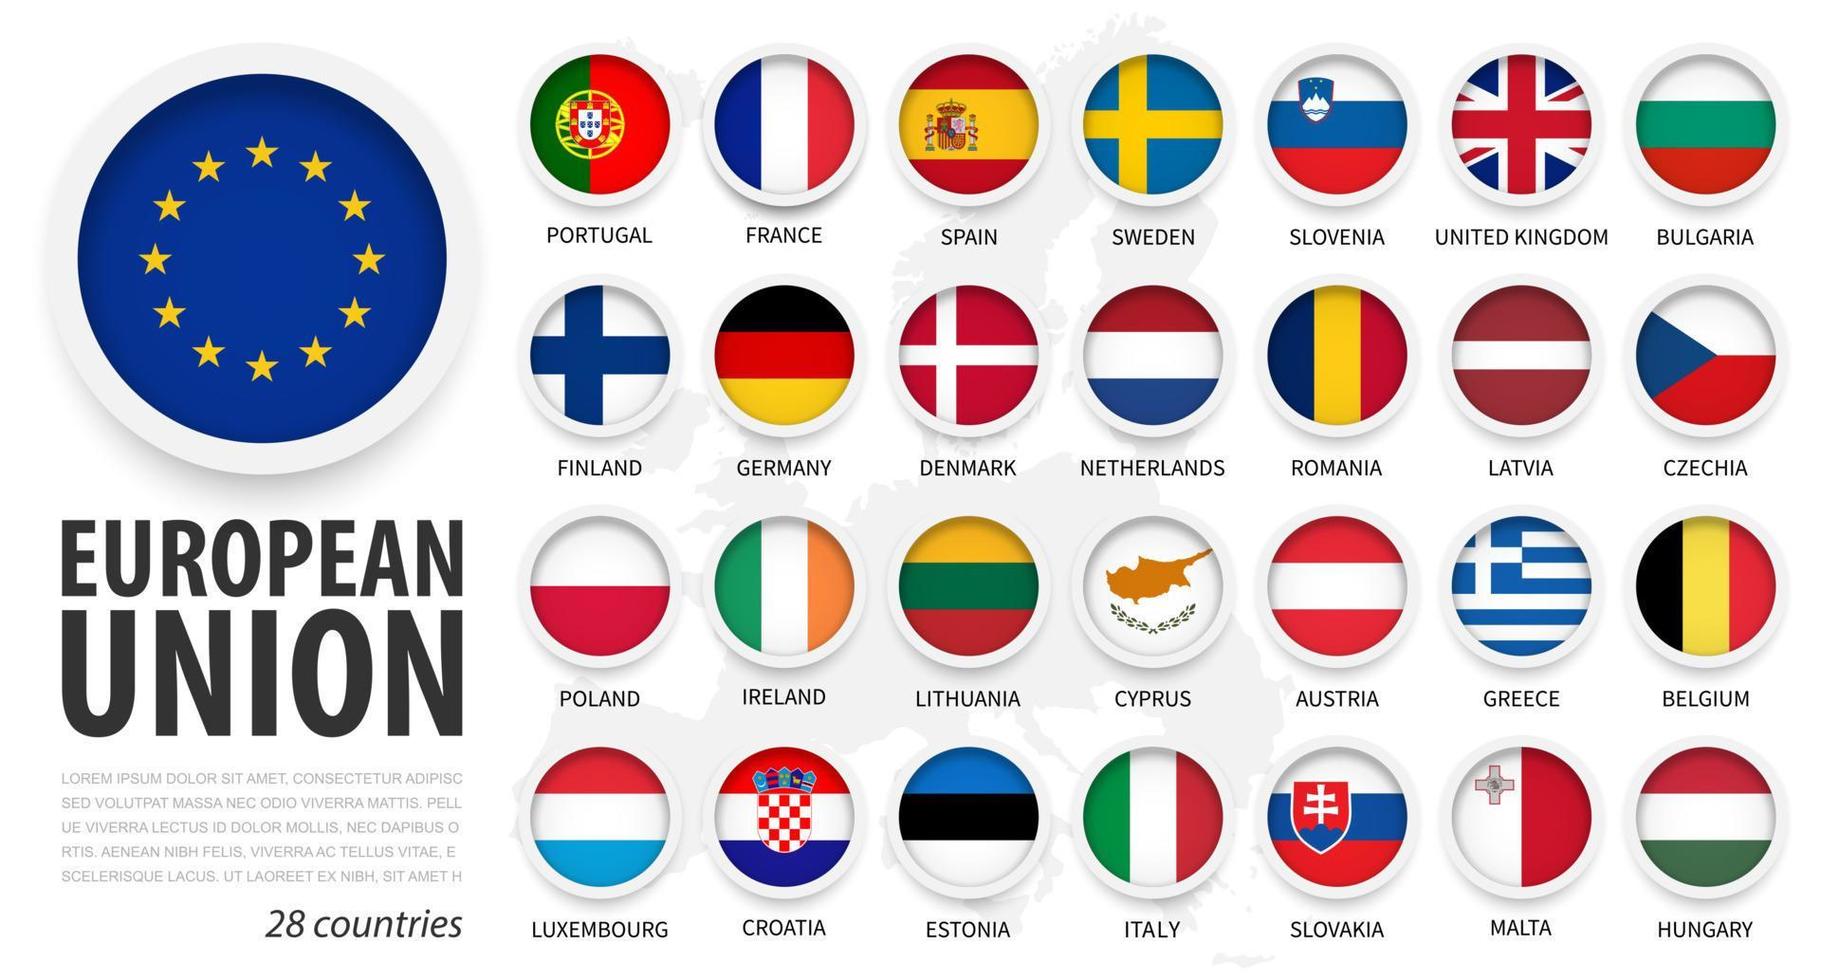 European union . EU and membership flags . Flat simple circle element design with white frame . Isolated background and europe map . Vector .